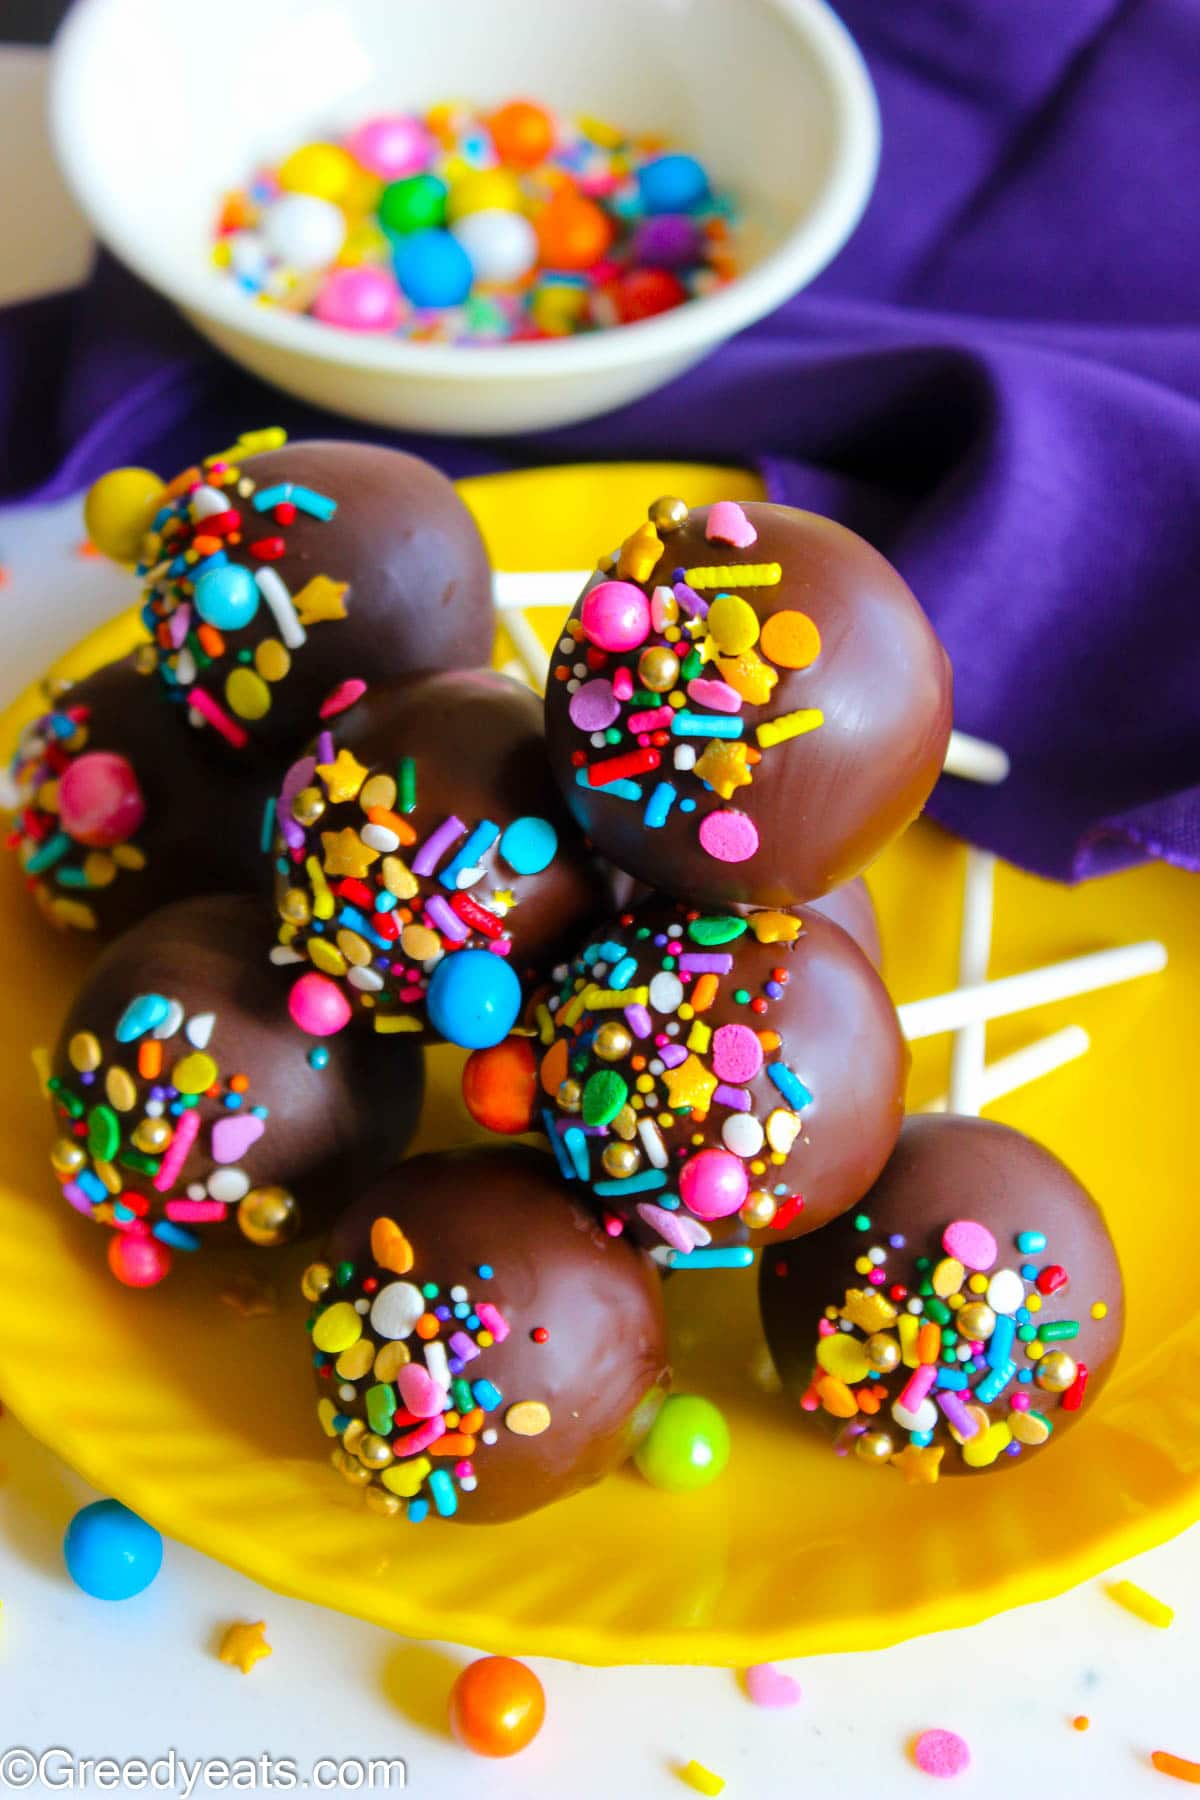 Easy Cake pops made with chocolate cake mix and chocolate frosting are coated in candy melts.